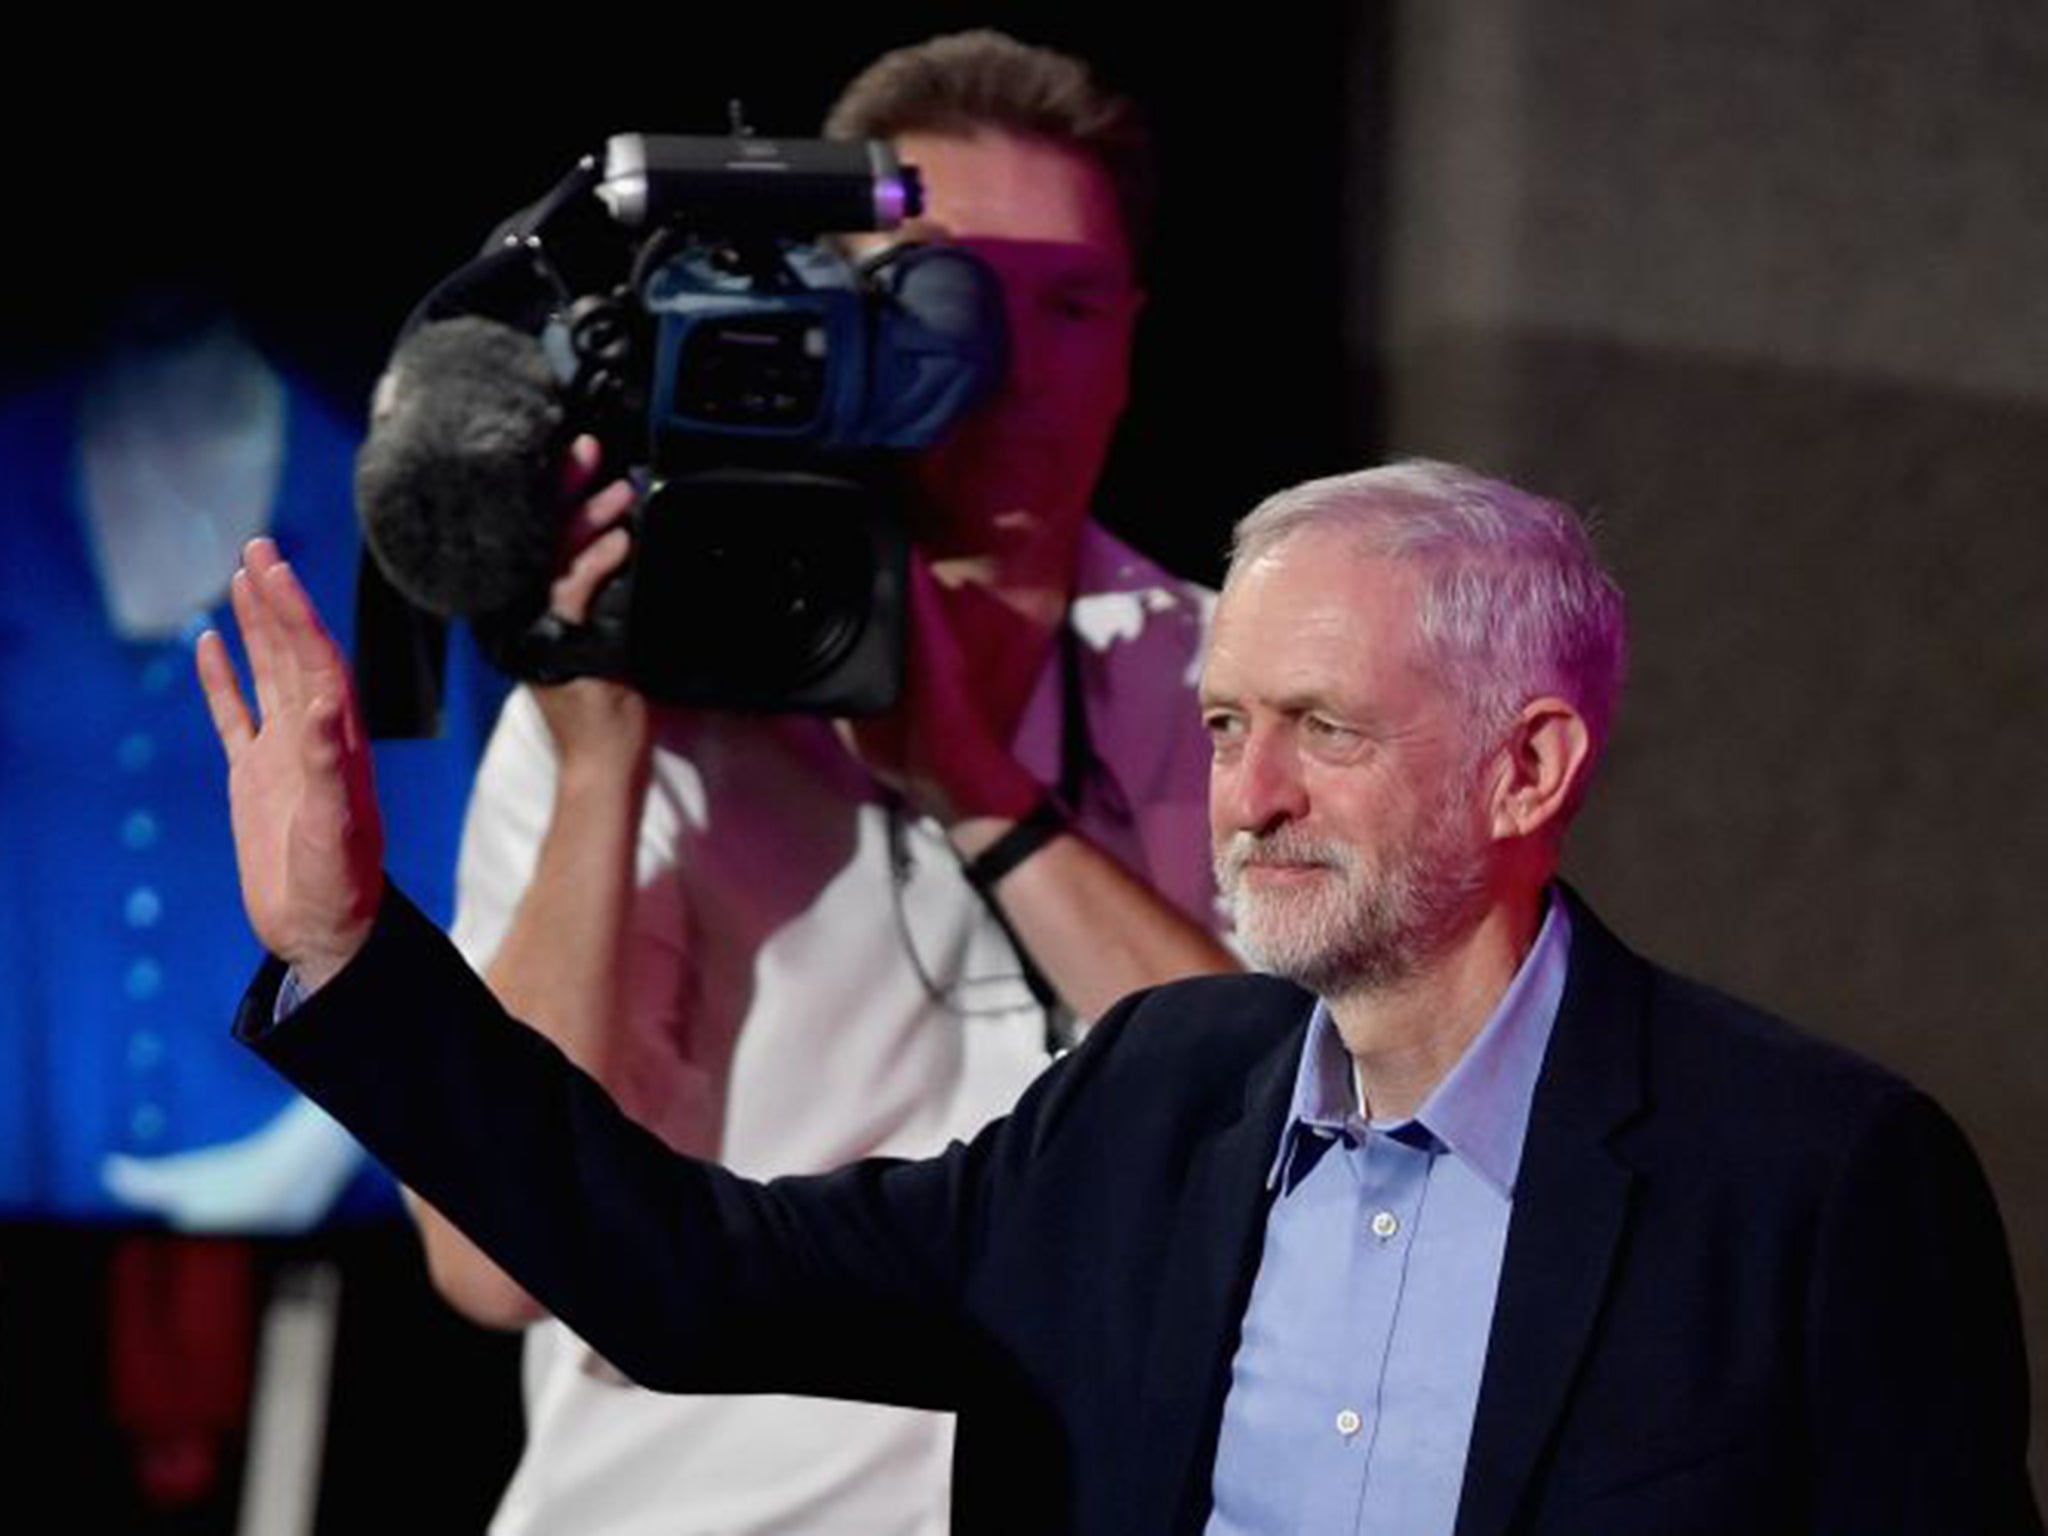 Jeremy Corbyn receives congratulations as his victory is announced